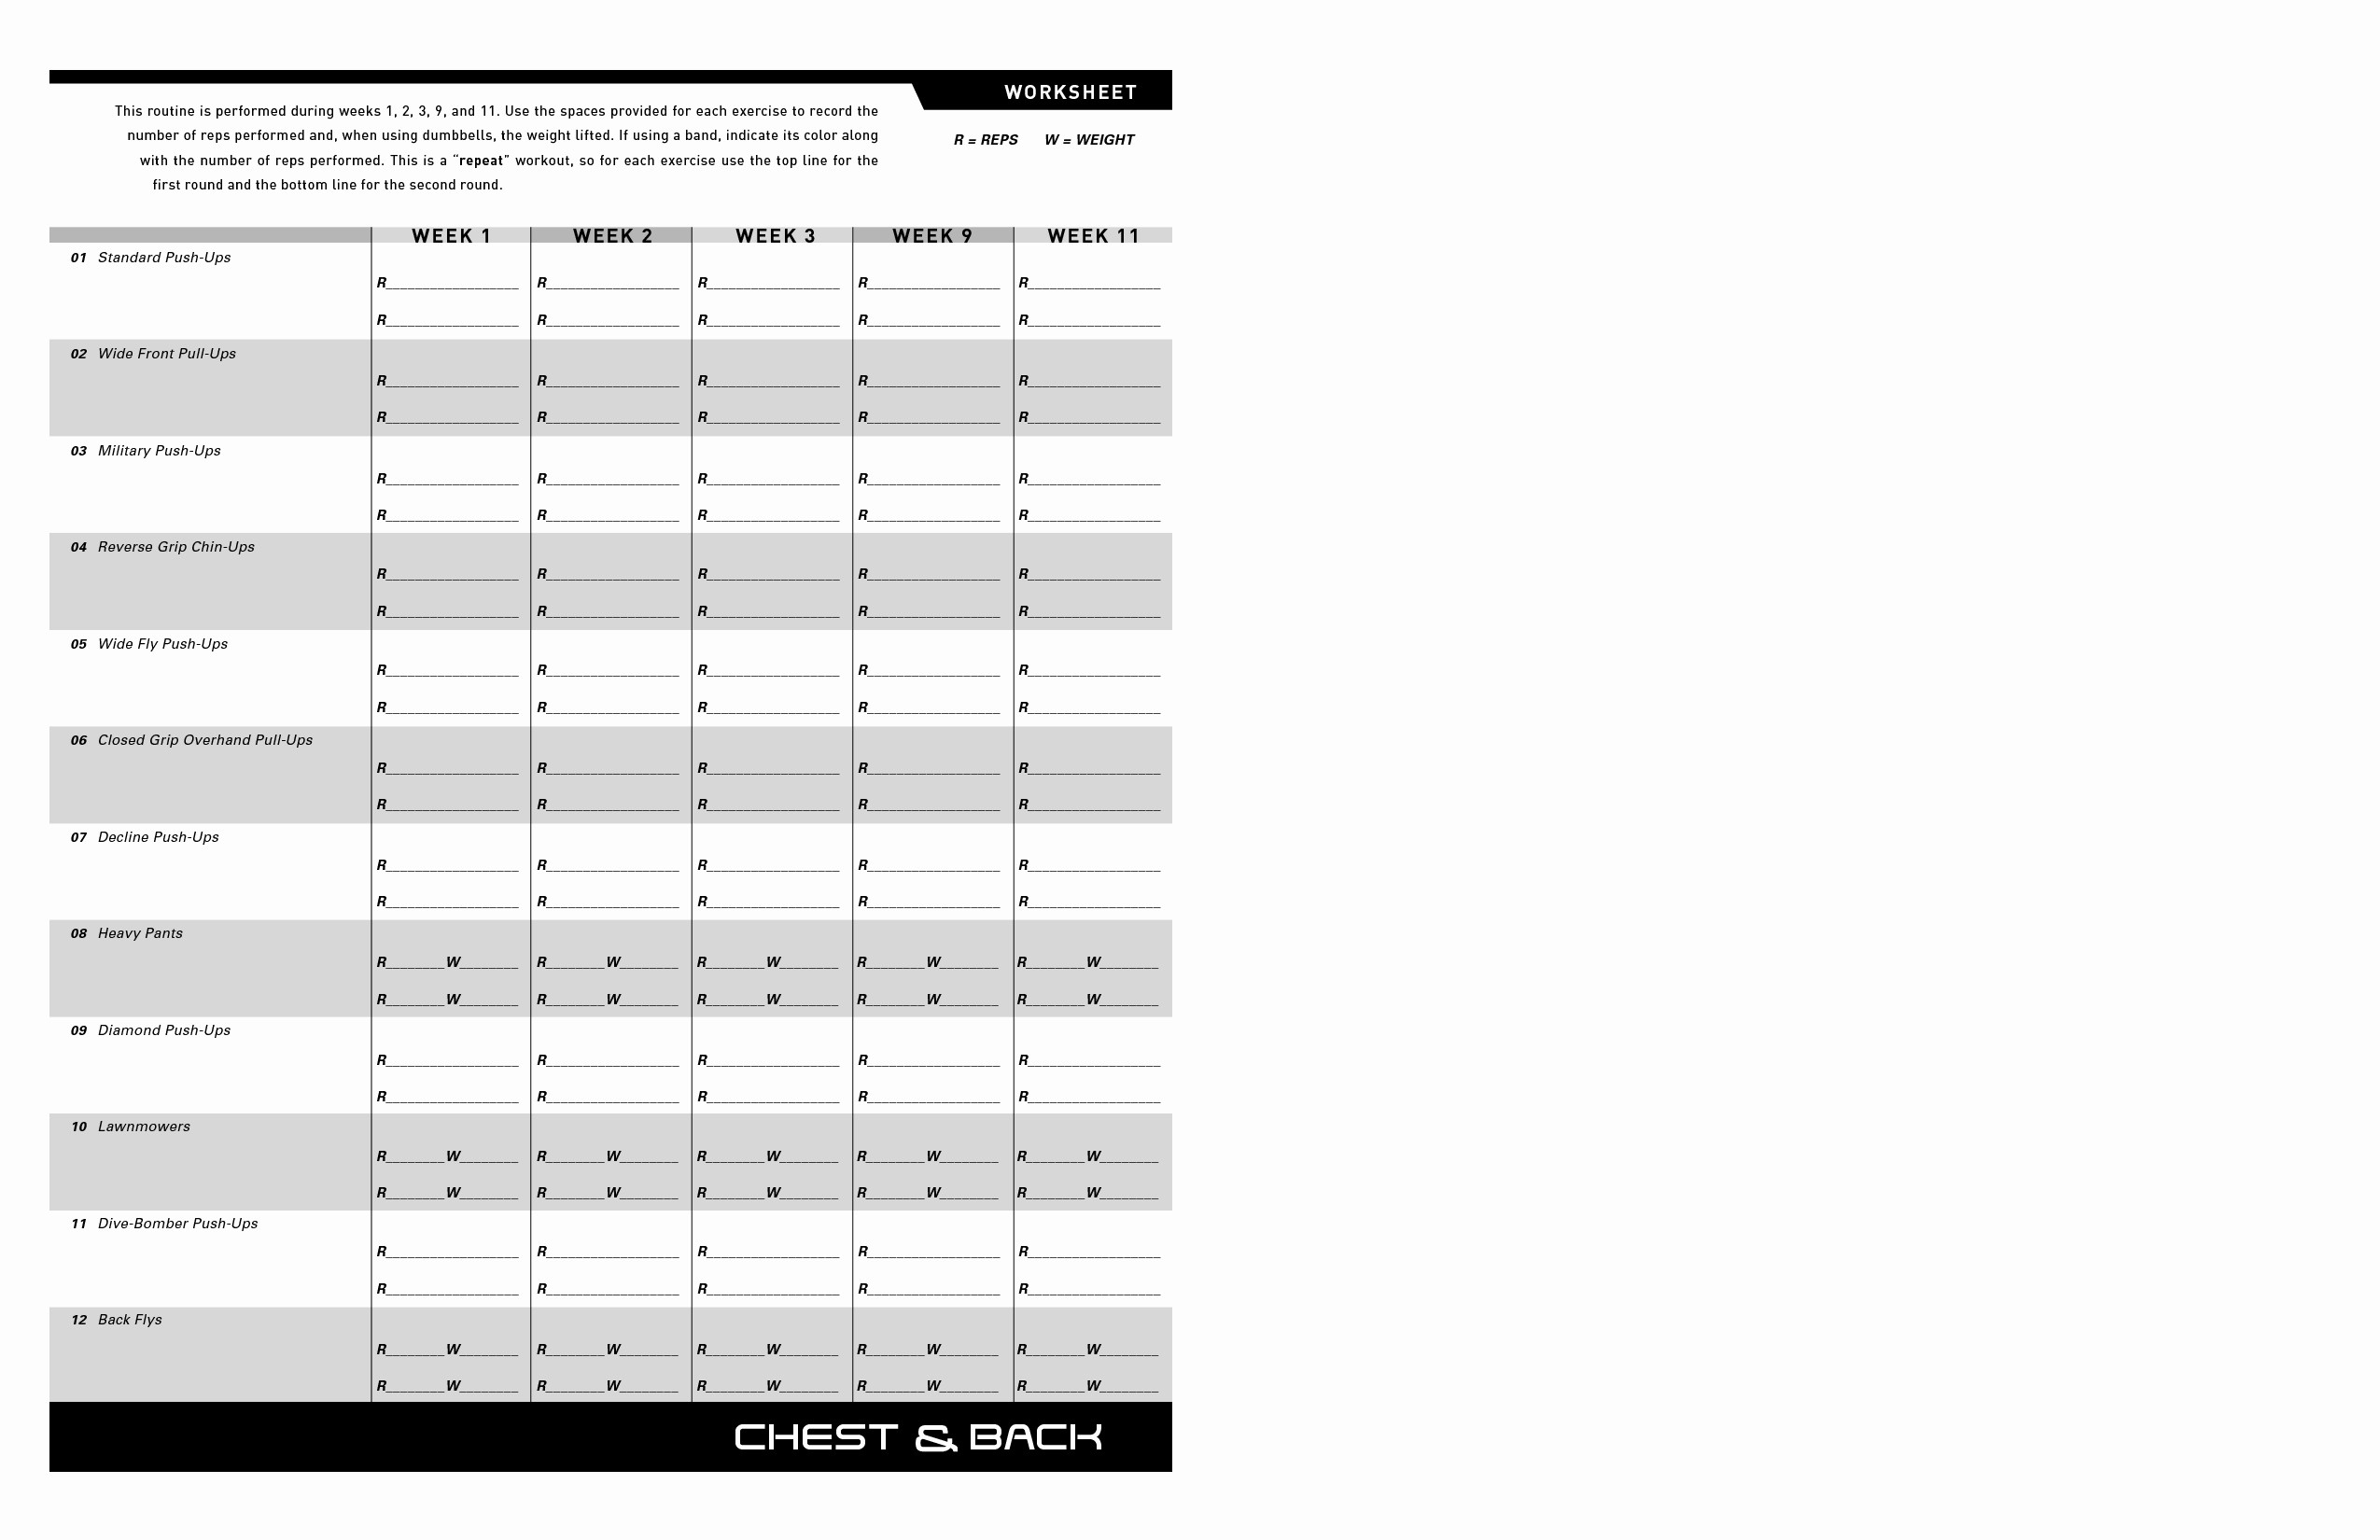 P90x Chest And Back Worksheet Awesome Workout Sheet Pdf Baskanai Document